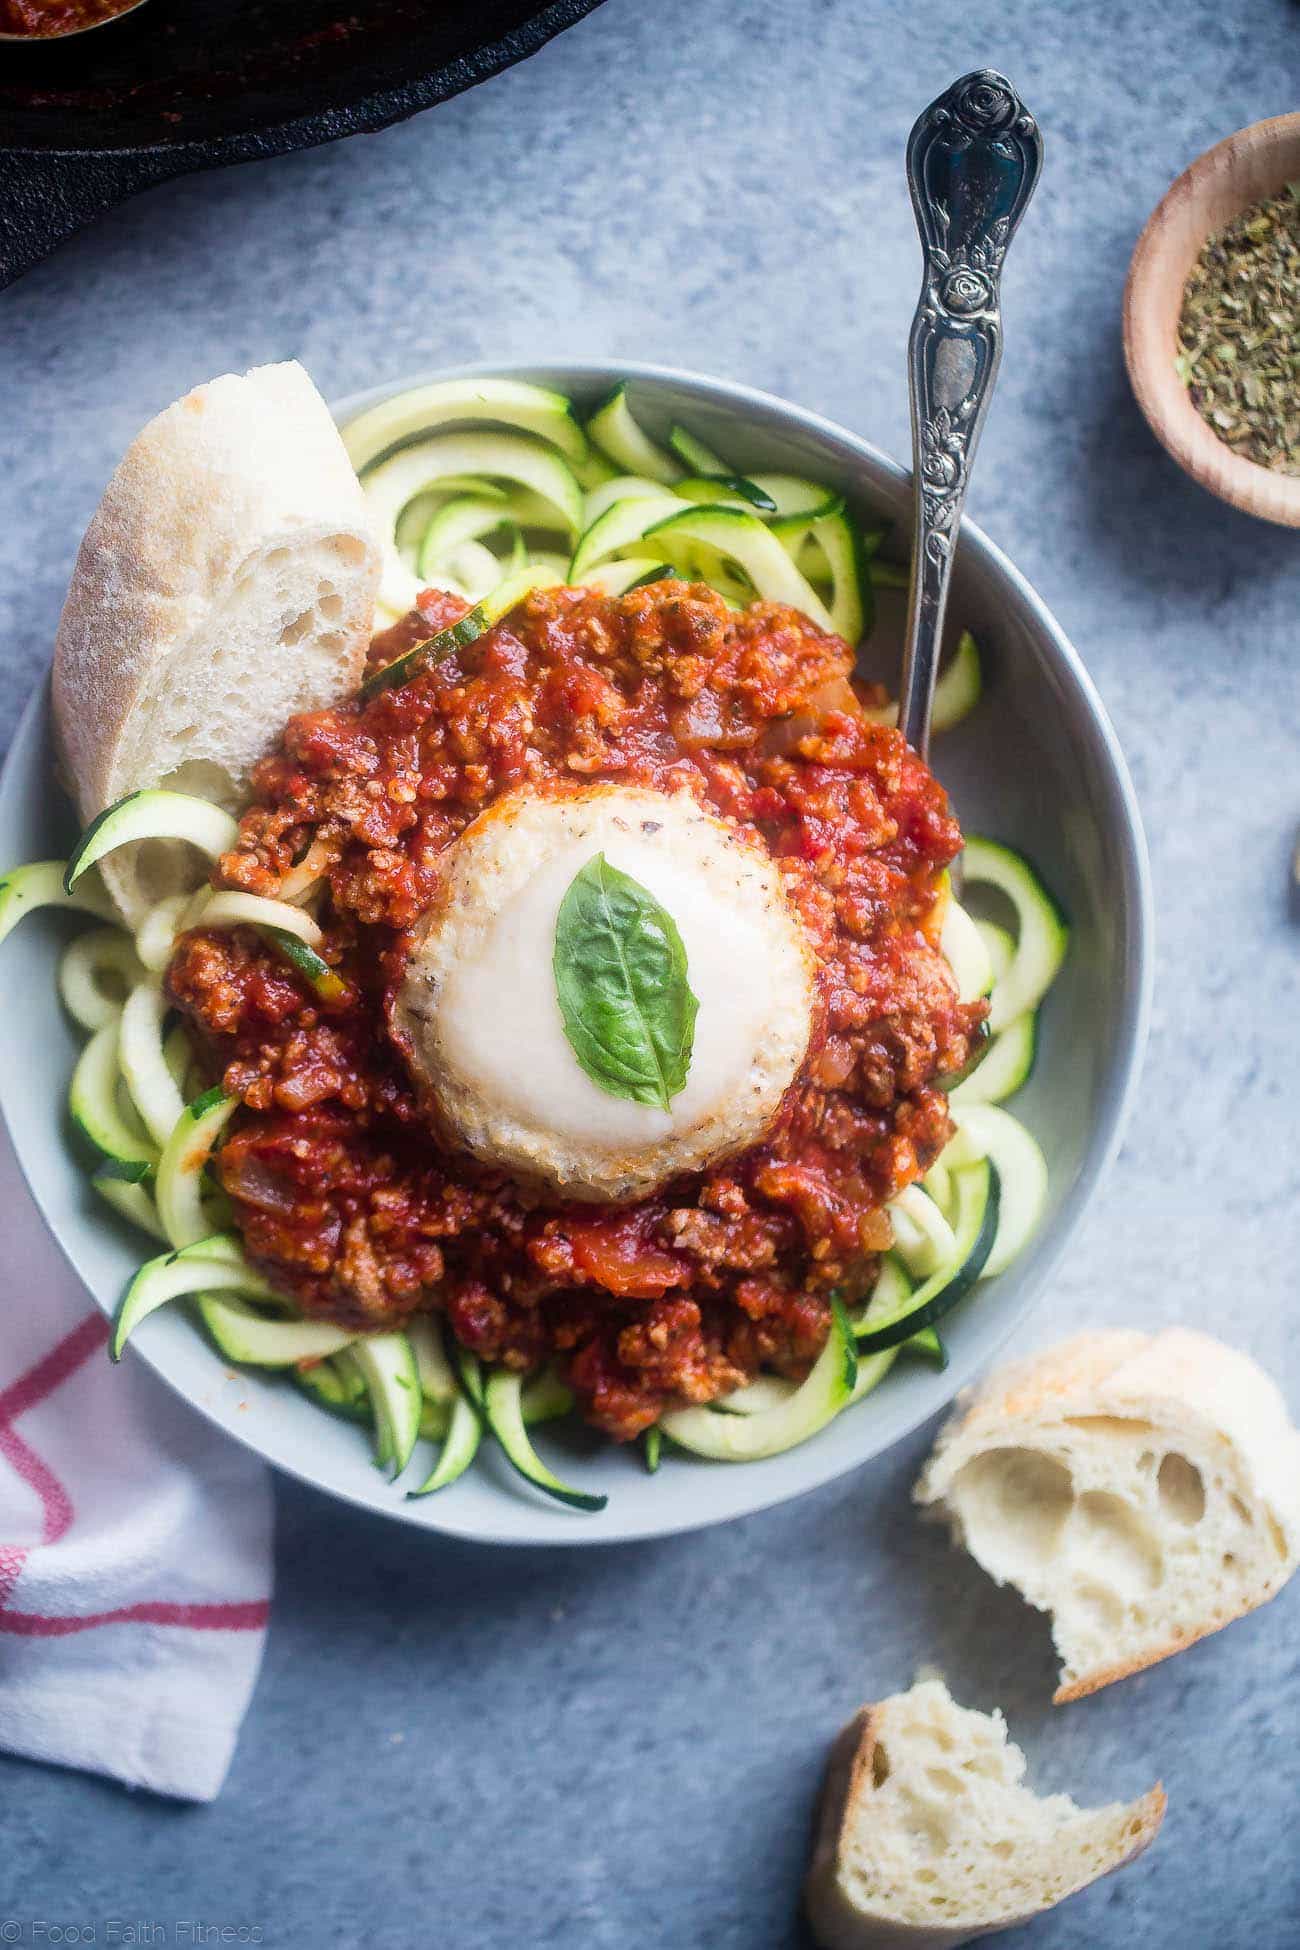 Cauliflower Caprese Skillet - These gluten free skillet has all the Italian flavors of the classic salad, in a light, healthy and low carb dinner that everyone will love! | Foodfaithfitness.com | @FoodFaithFit